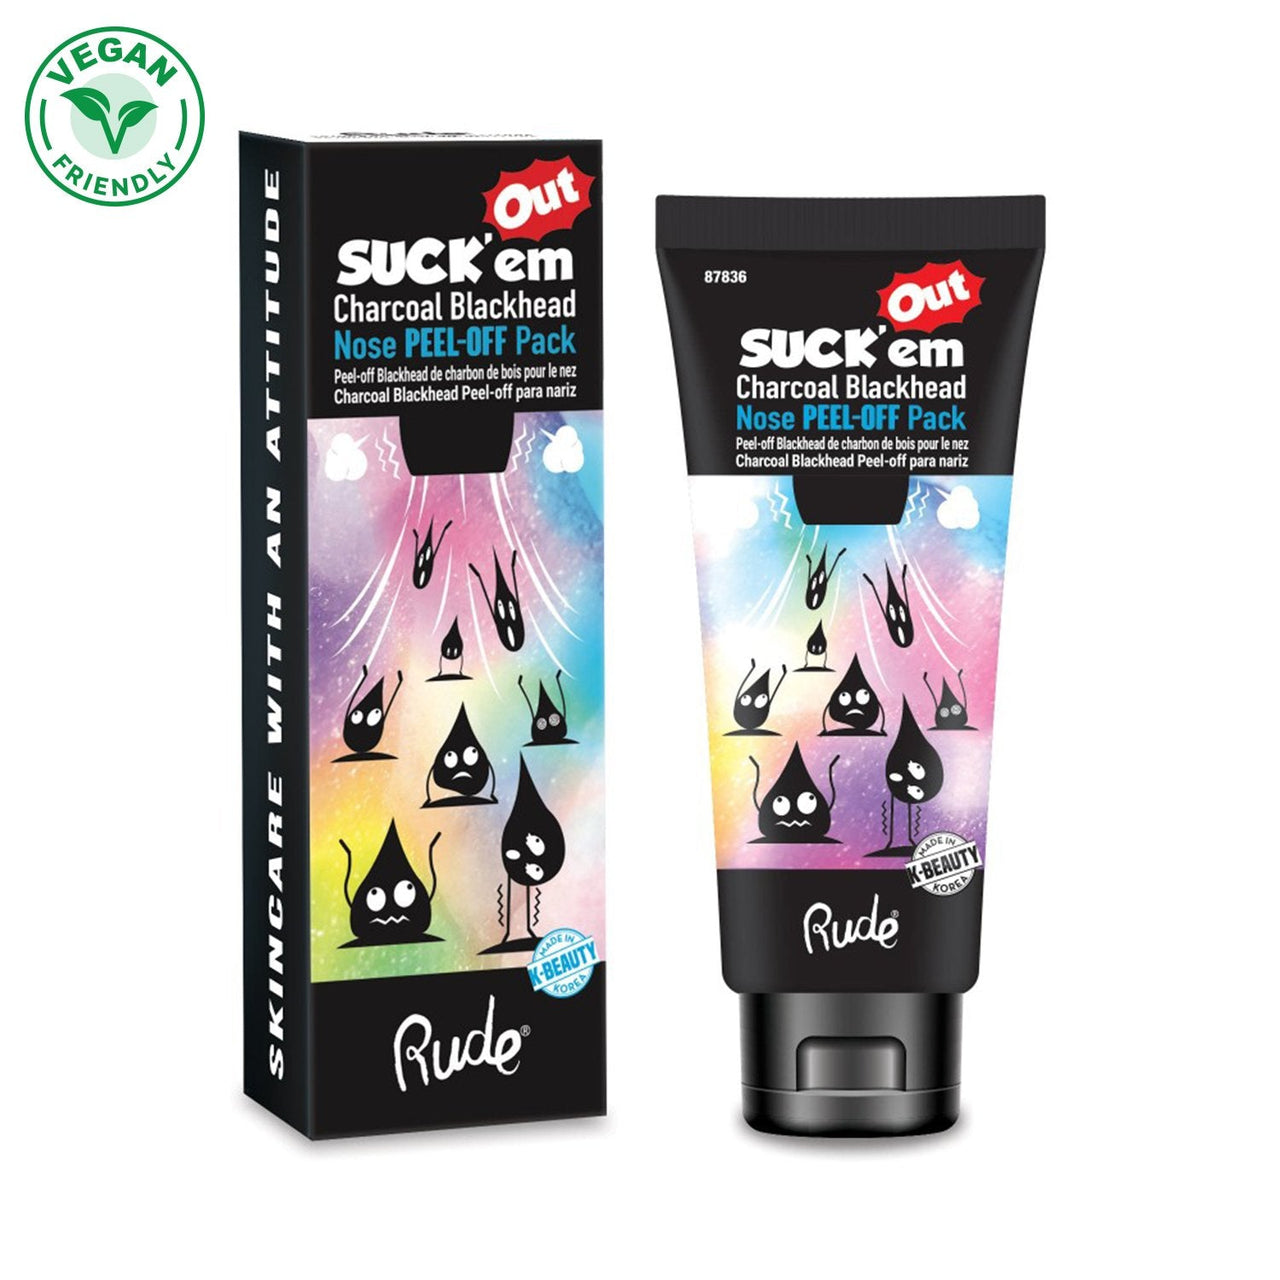 RUDE Suck'em Out Charcoal Blackhead Nose Peel-off Pack Display Set, 12 Pieces